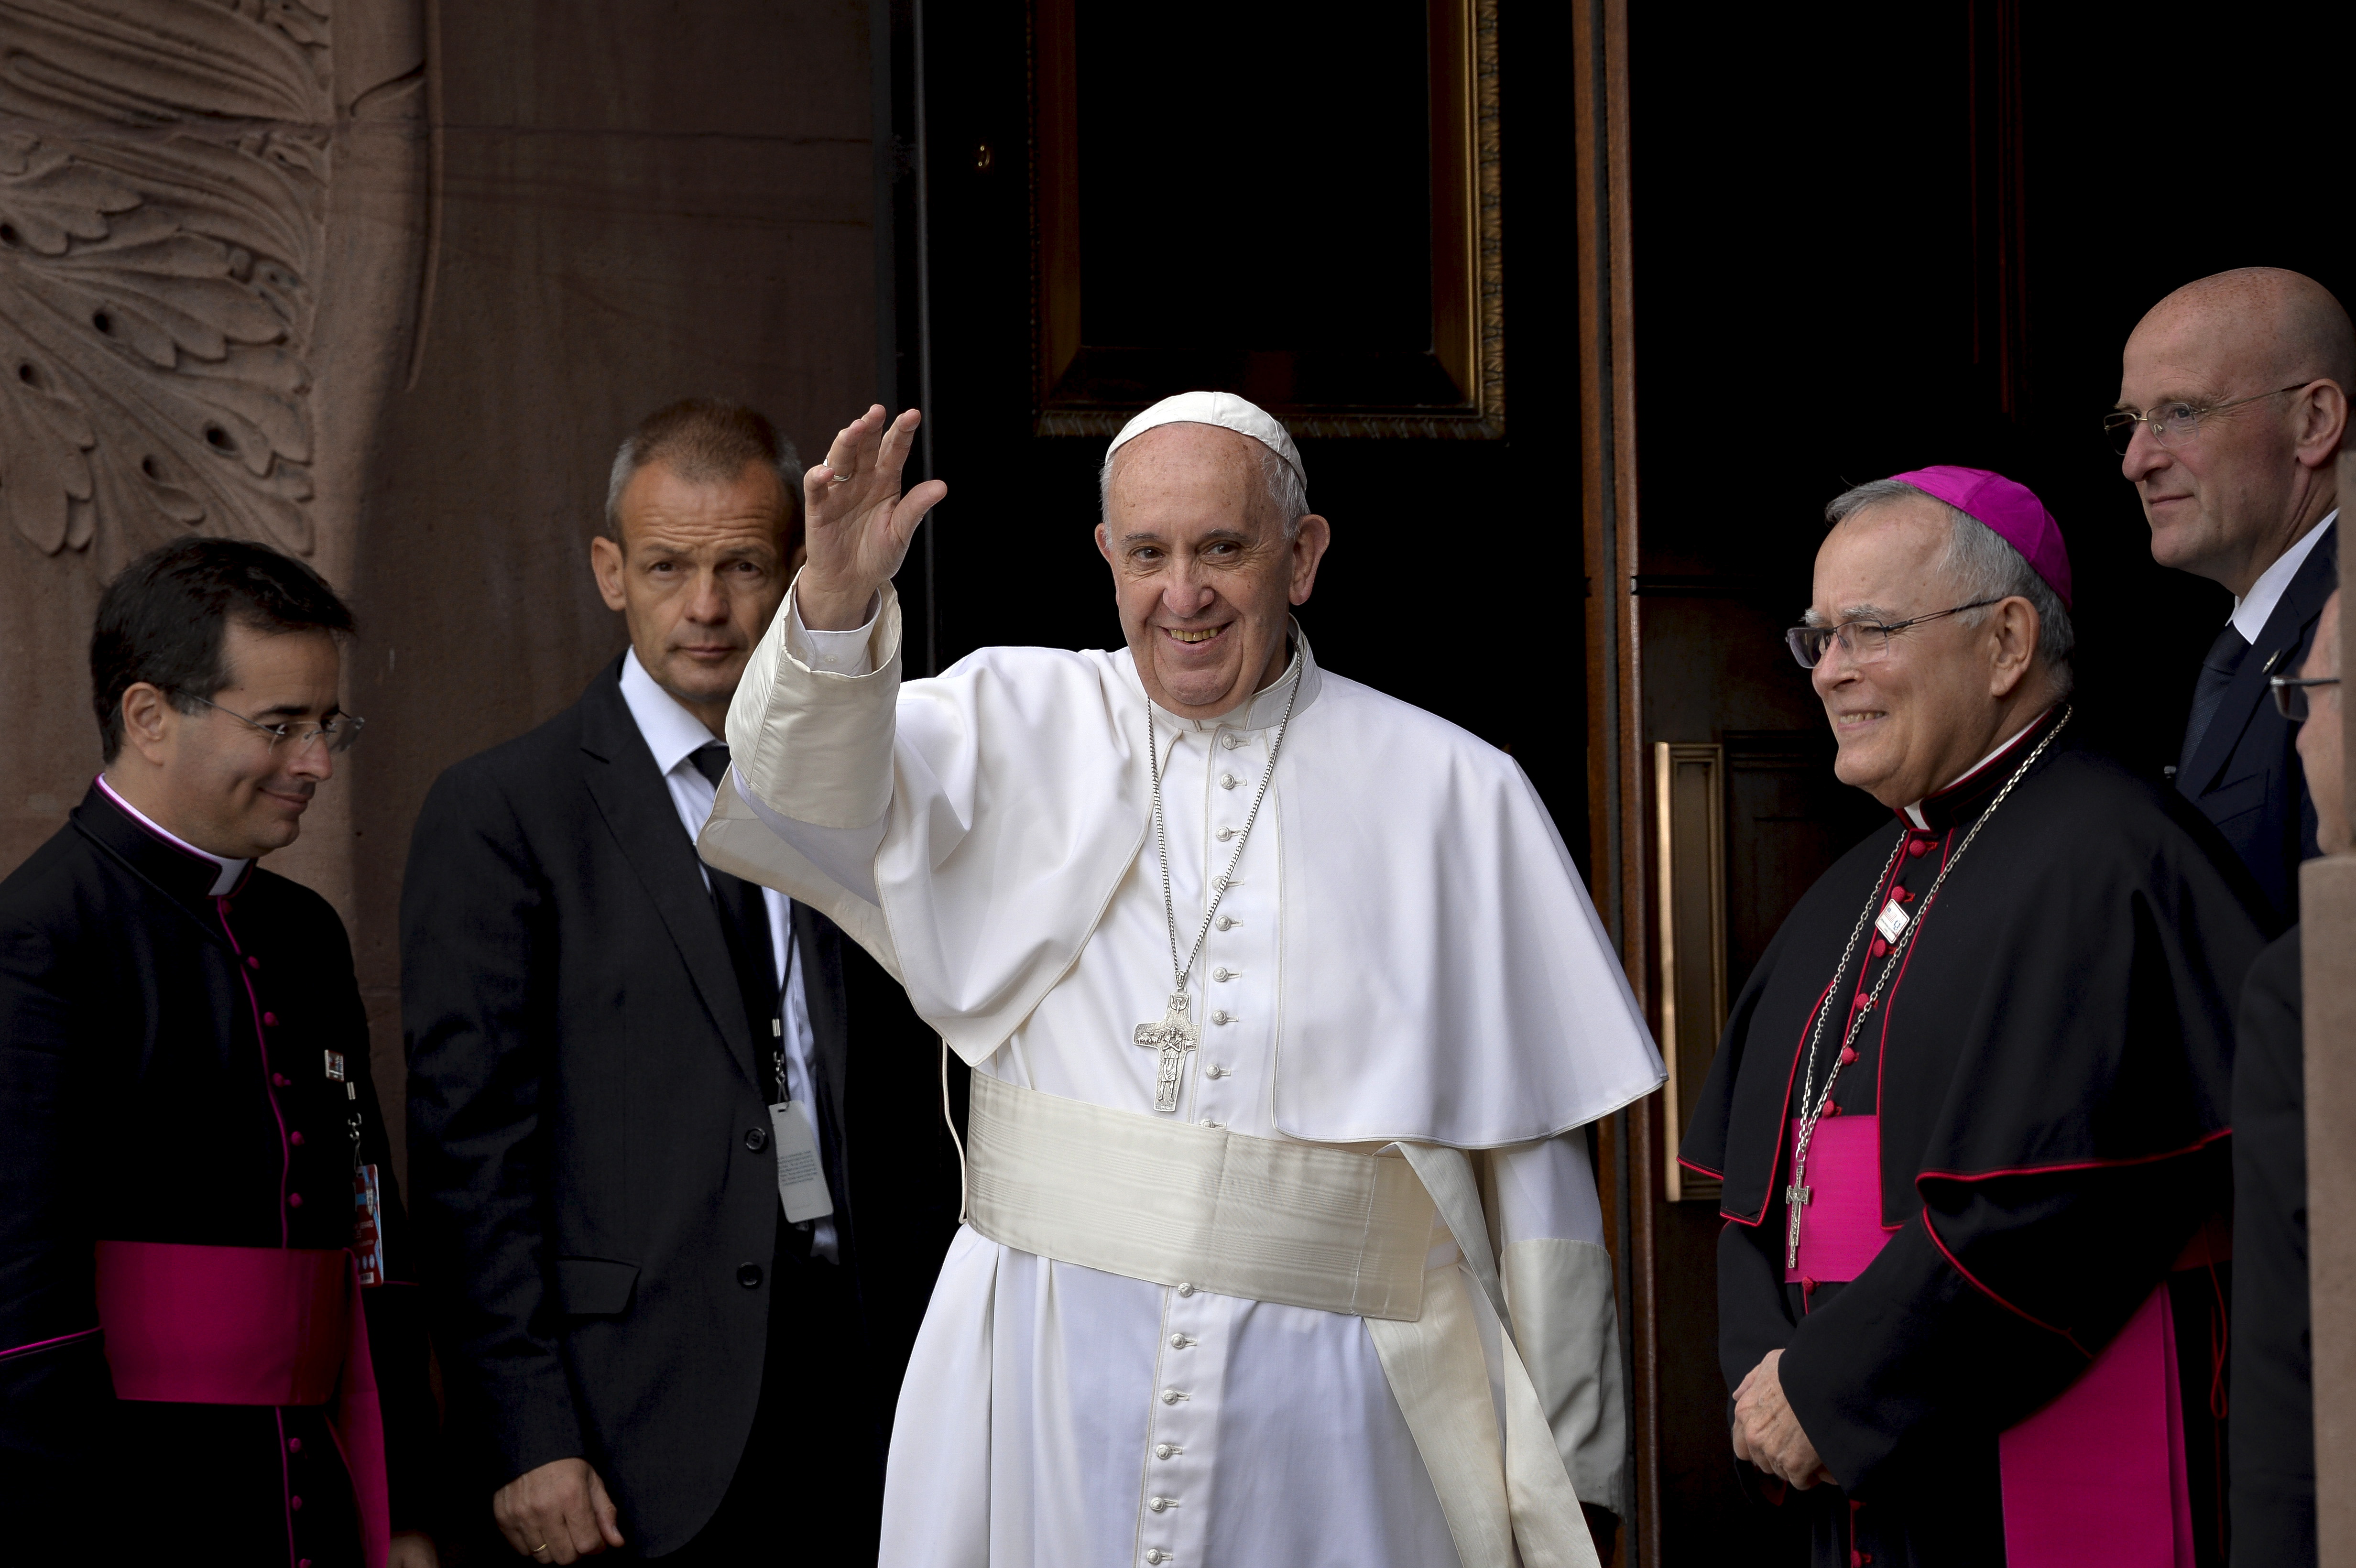 Pope Francis waves to the crowd as he arrives for mass at the Basilica of St. Peter and Paul, in Philadelphia, Pennsylvania, September 26, 2015. Photo courtesy REUTERS/Charles Mostoller